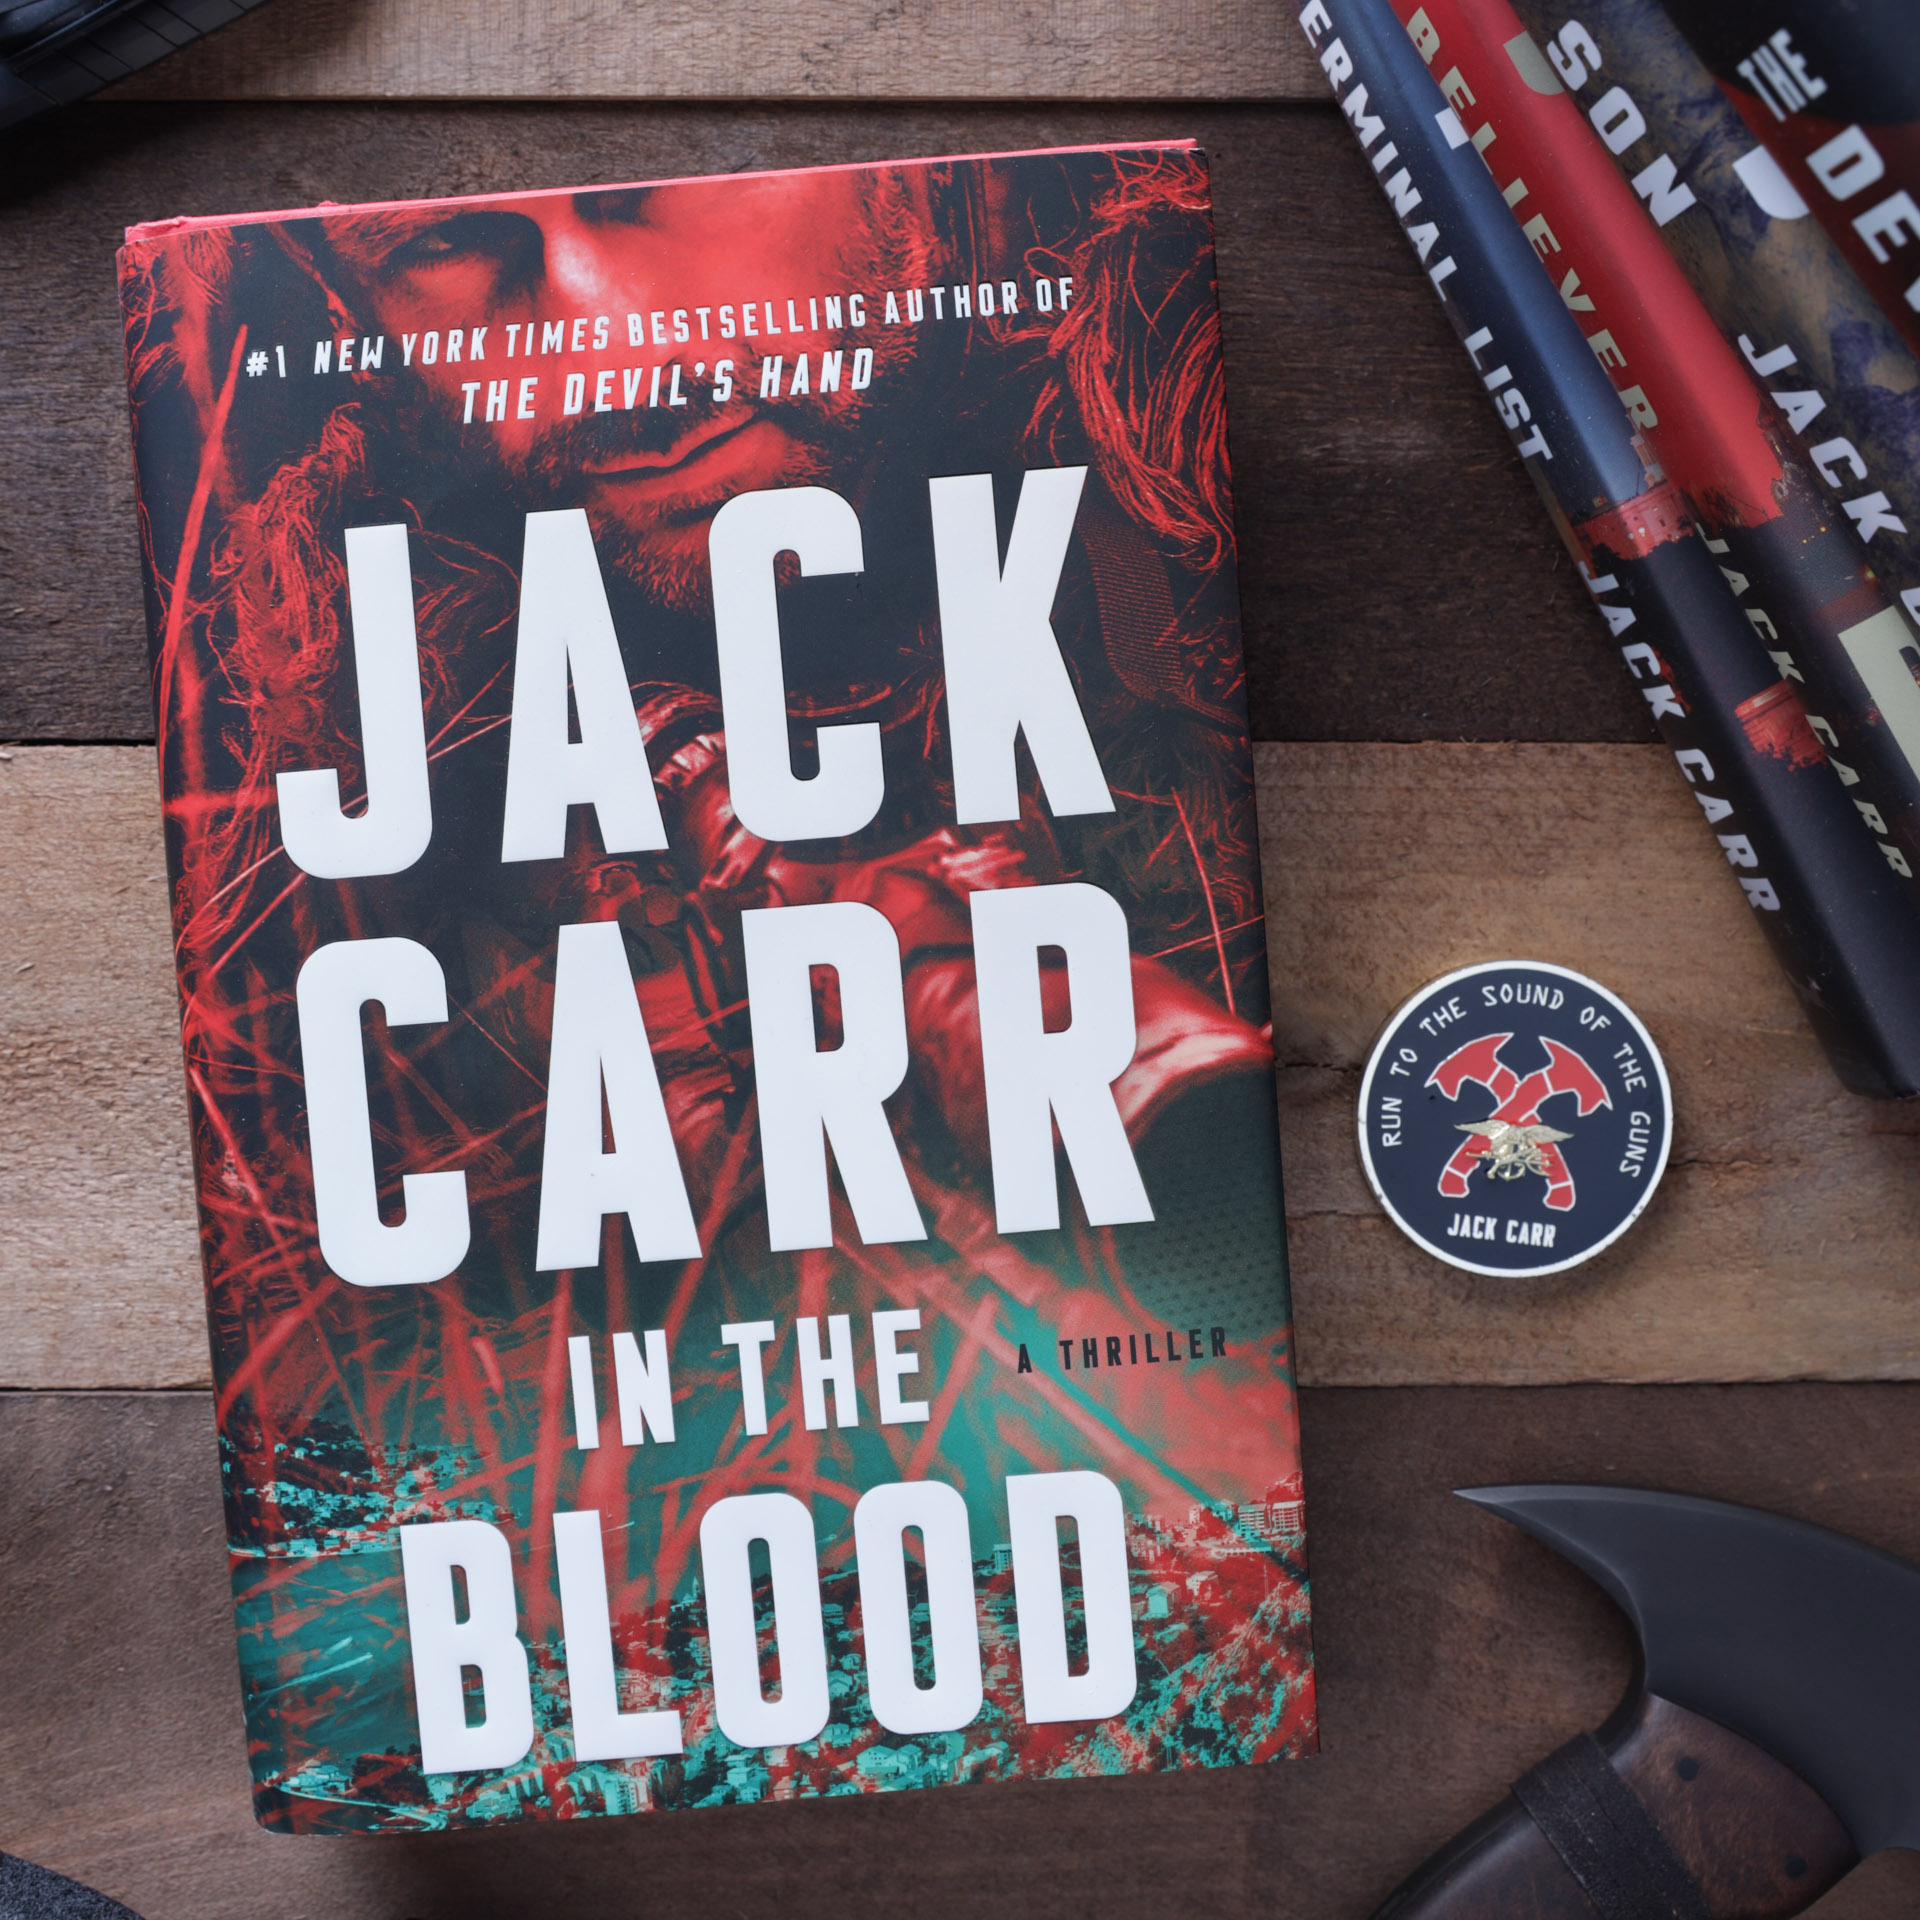 https://www.officialjackcarr.com/wp-content/uploads/2022/05/In-The-Blood-494-2.jpg